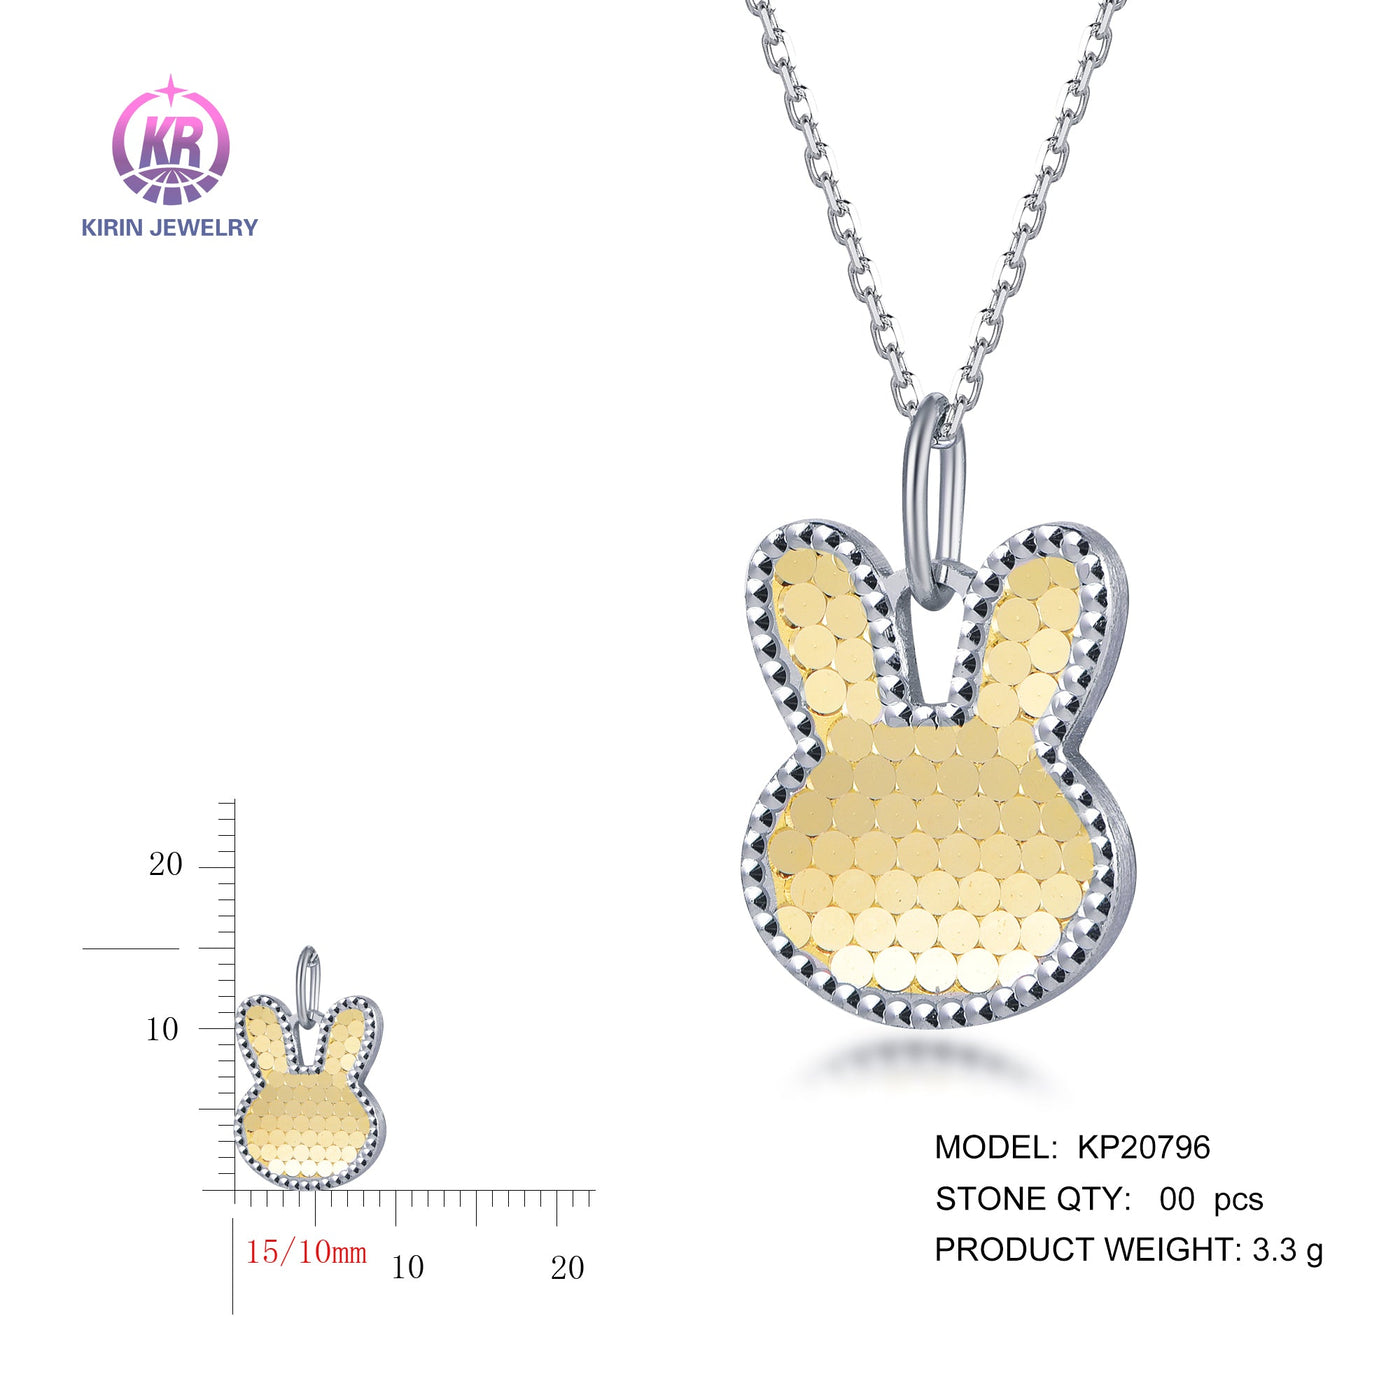 925 silver pendant with 2-tone plating rhodium and 14K gold KP20796 Kirin Jewelry